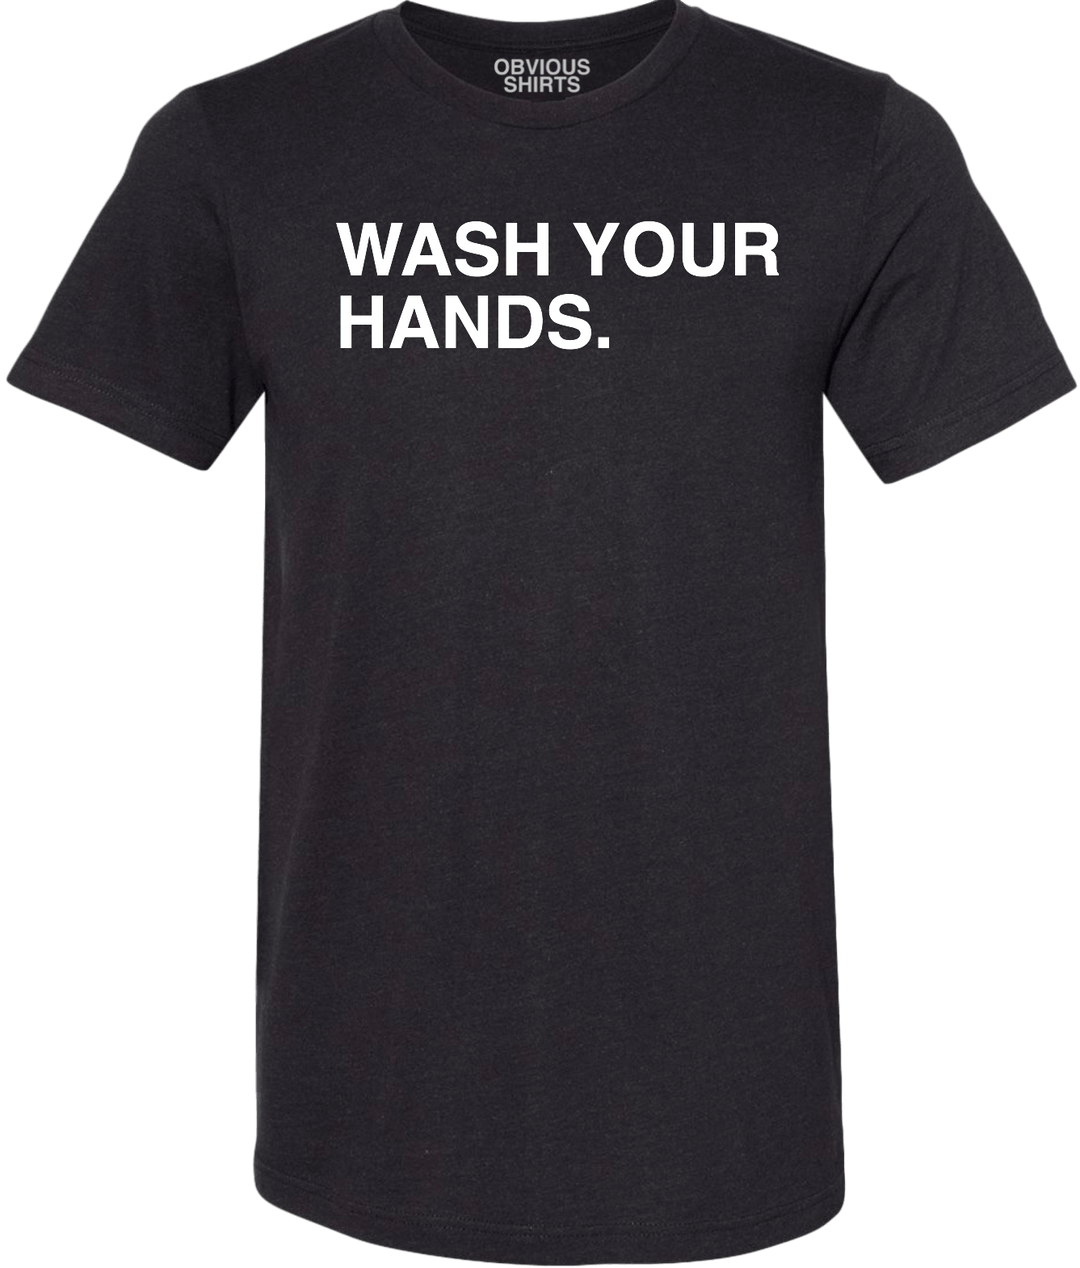 WASH YOUR HANDS. - OBVIOUS SHIRTS.